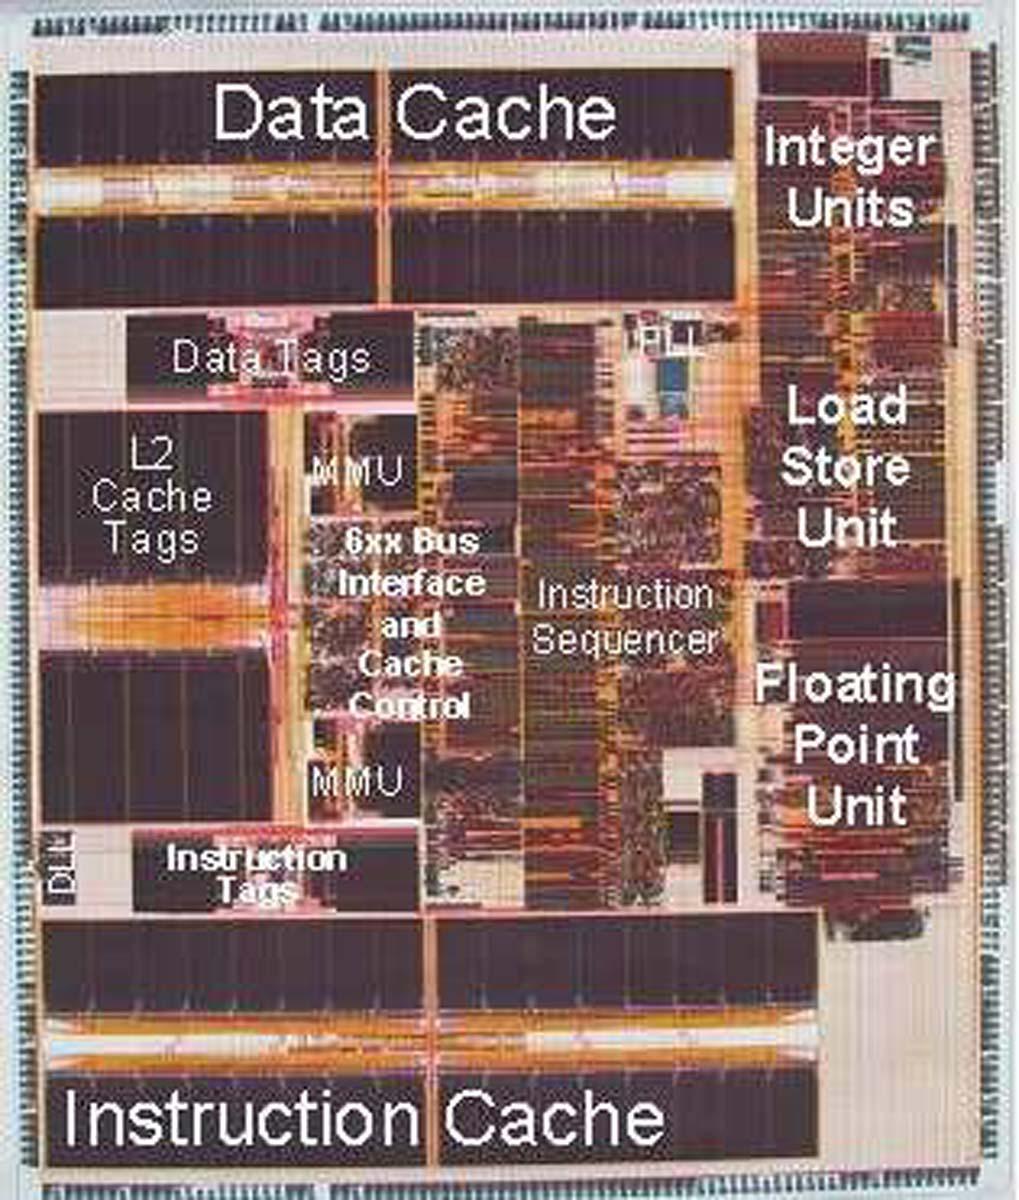 An actual CPU Early PowerPC Cache ú 32 KB Instructions and 32 KB Data L1 caches ú External L2 Cache interface with integrated controller and cache tags, supports up to 1 MByte external L2